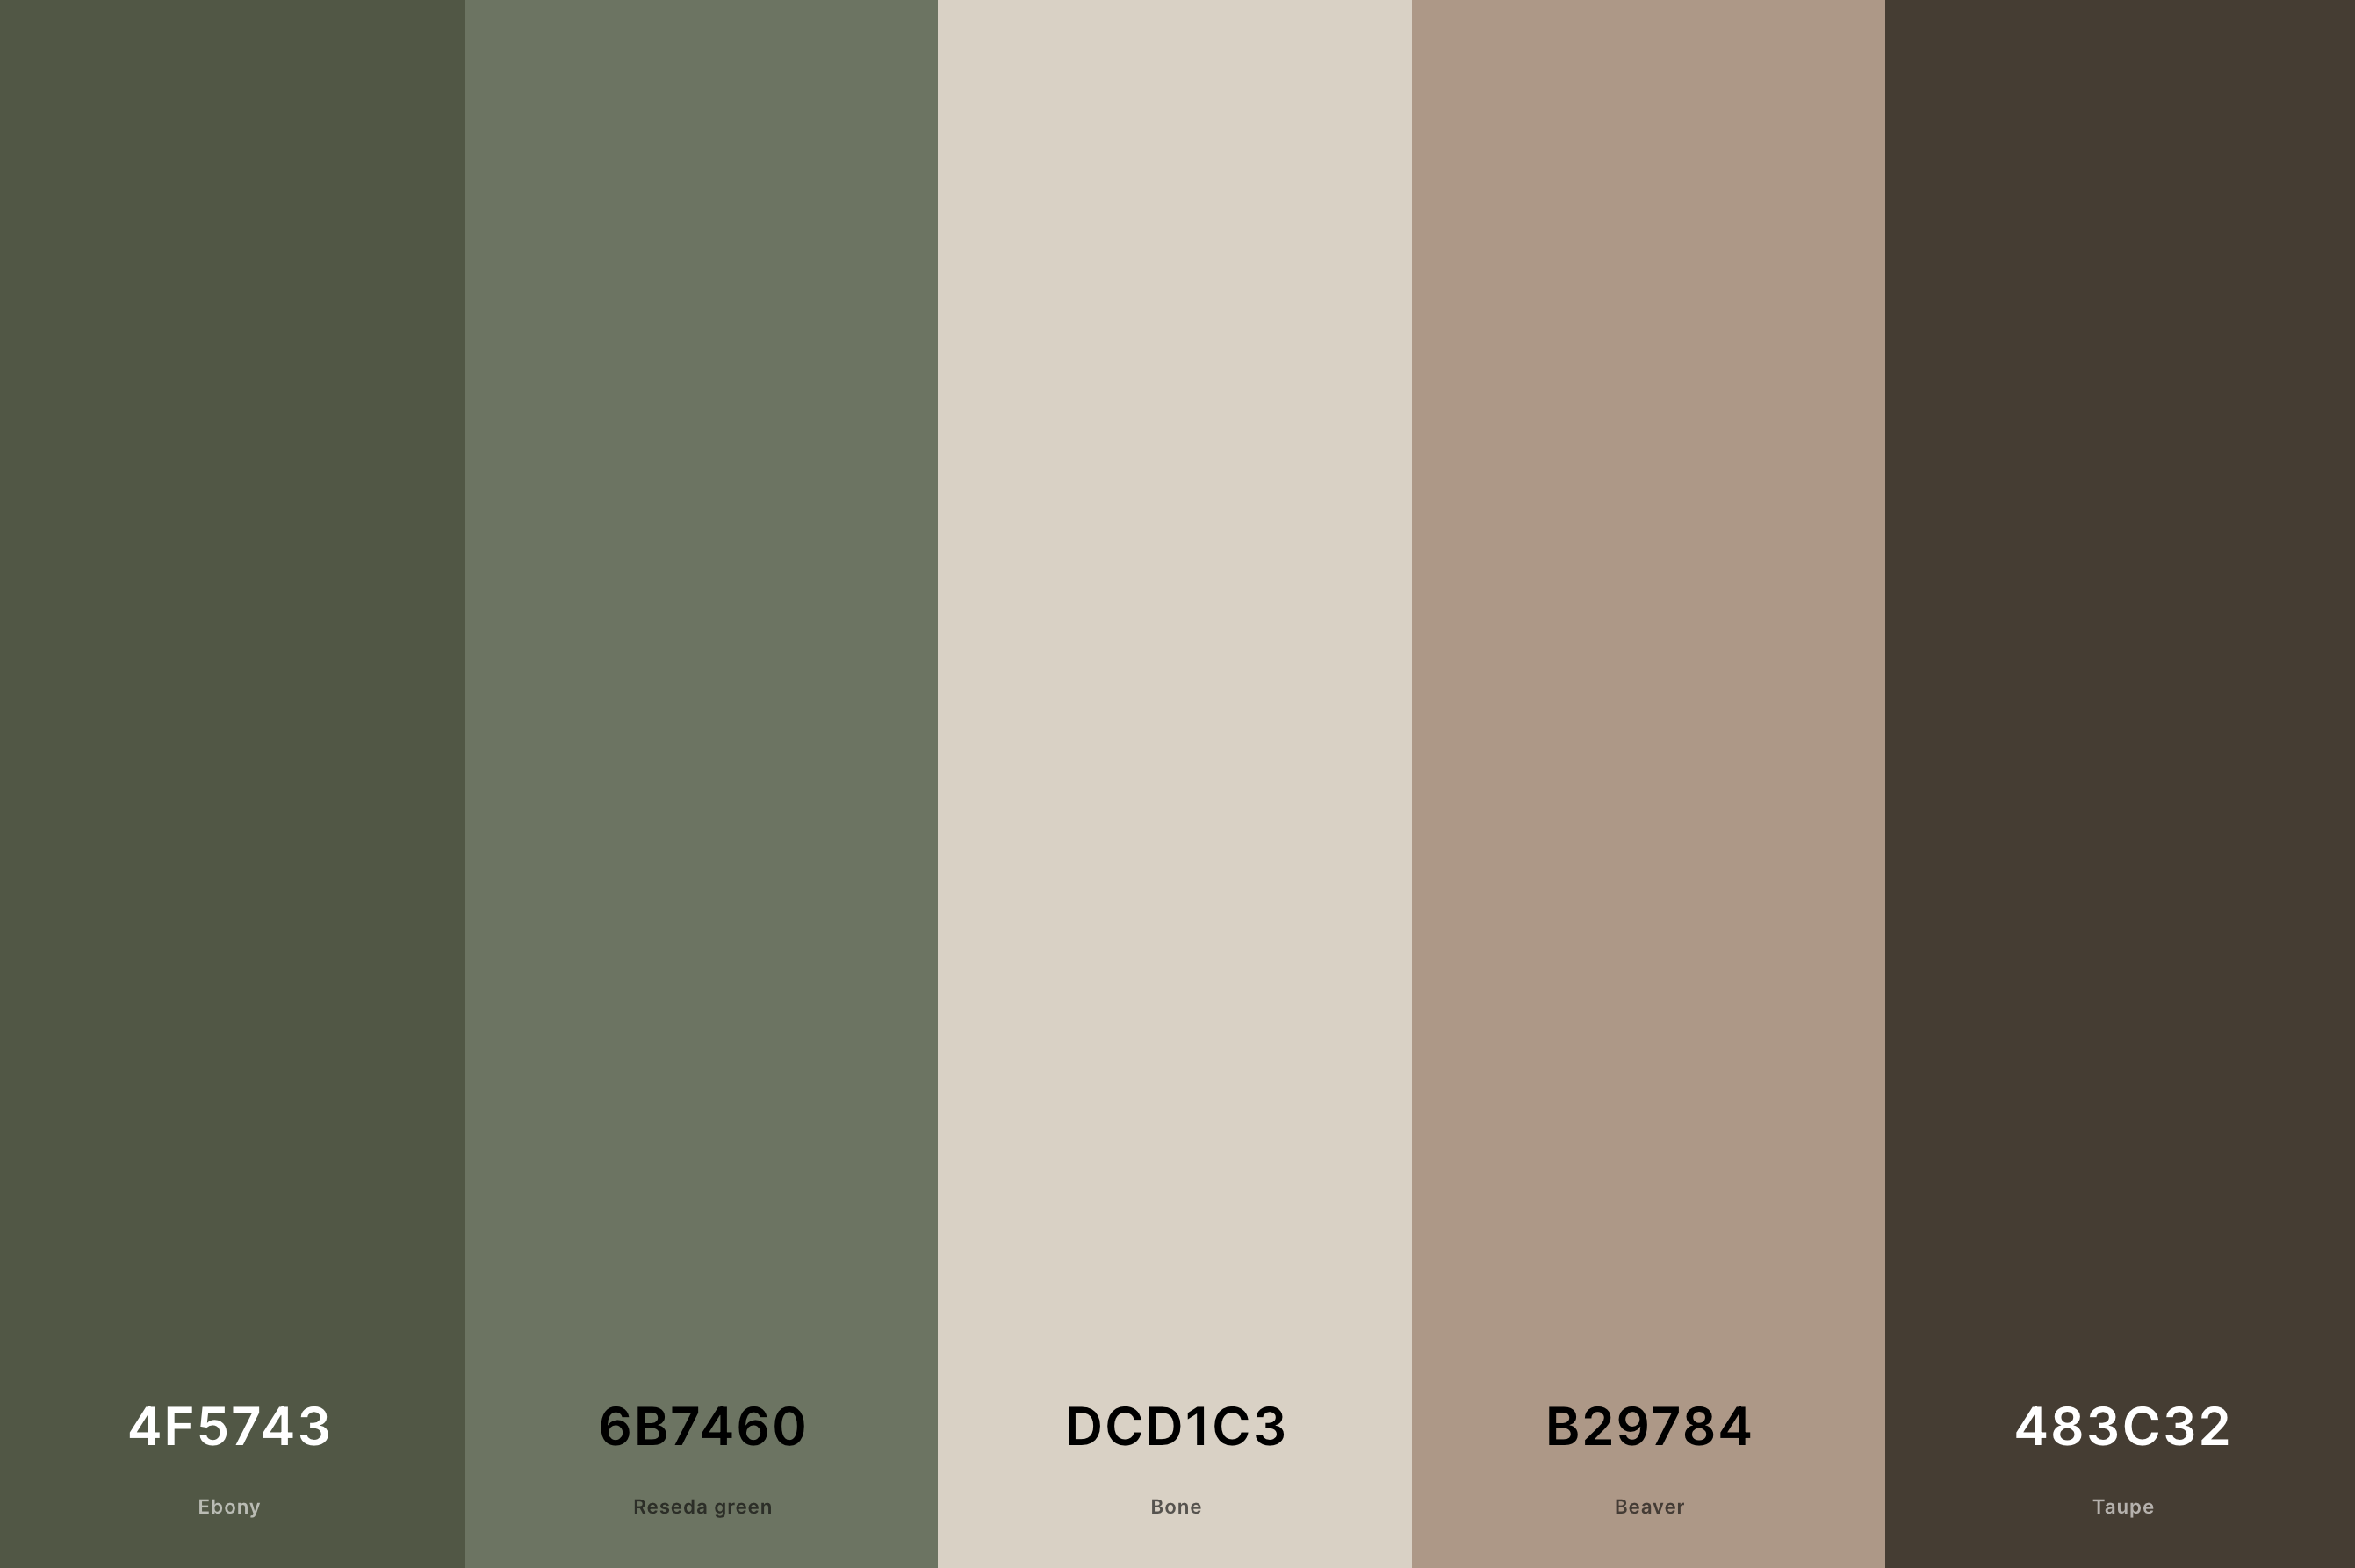 24. Sage Green And Taupe Color Palette Color Palette with Ebony (Hex #4F5743) + Reseda Green (Hex #6B7460) + Bone (Hex #DCD1C3) + Beaver (Hex #B29784) + Taupe (Hex #483C32) Color Palette with Hex Codes